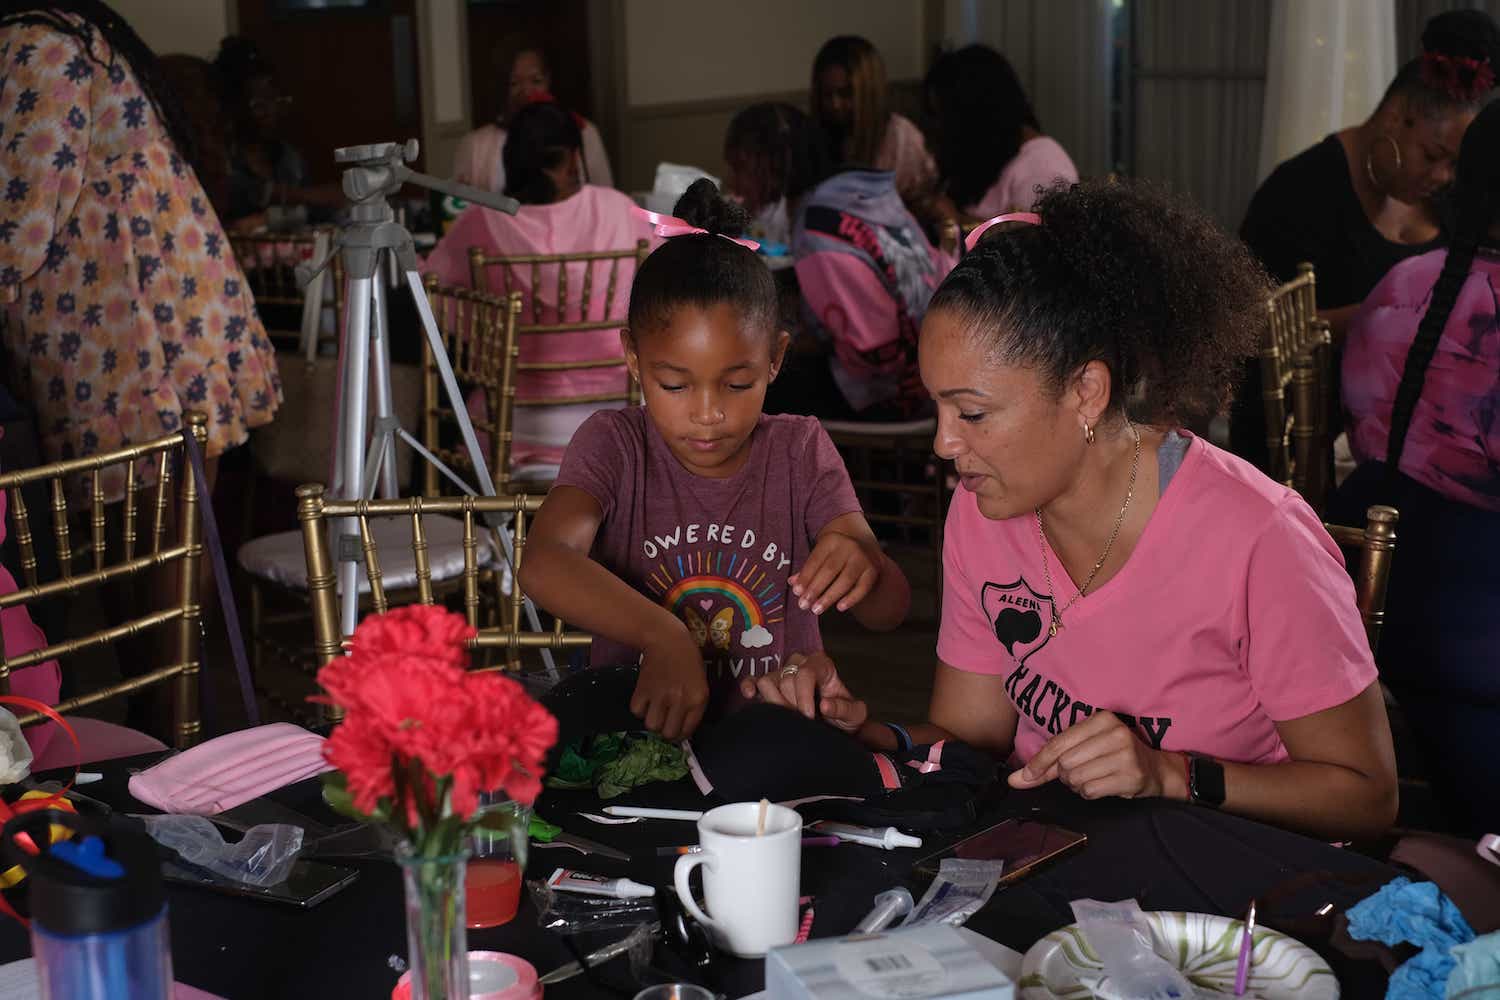 Black Women for Wellness Annual Risqué Breast Health Conference 45